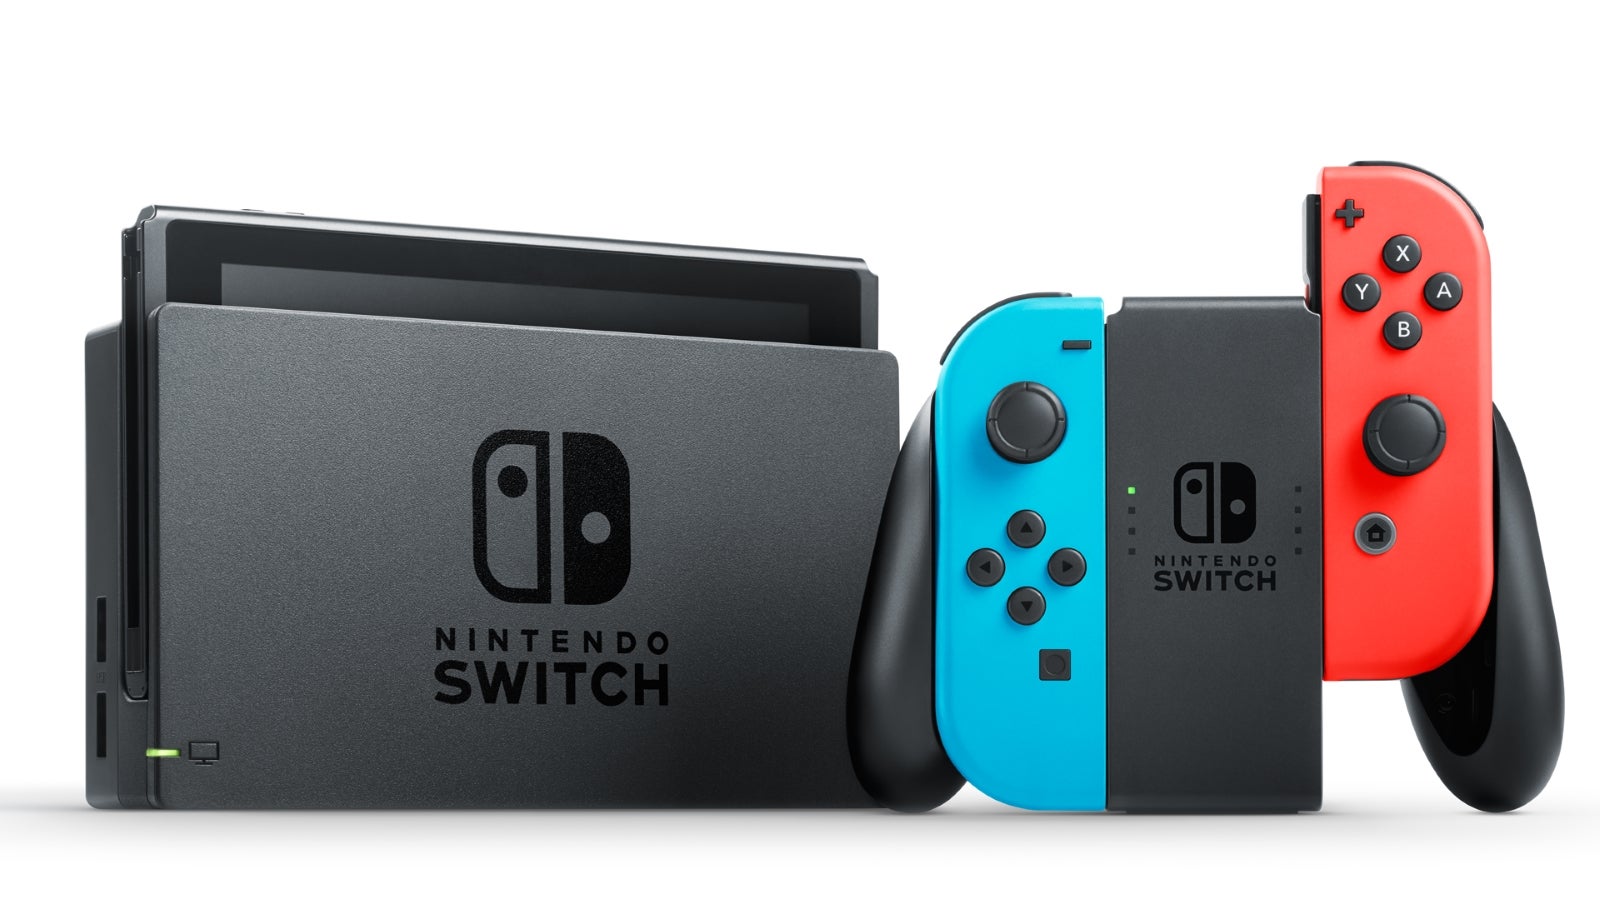 Image for Switch sales top 103.5 million units, is now Nintendo's best-selling home console